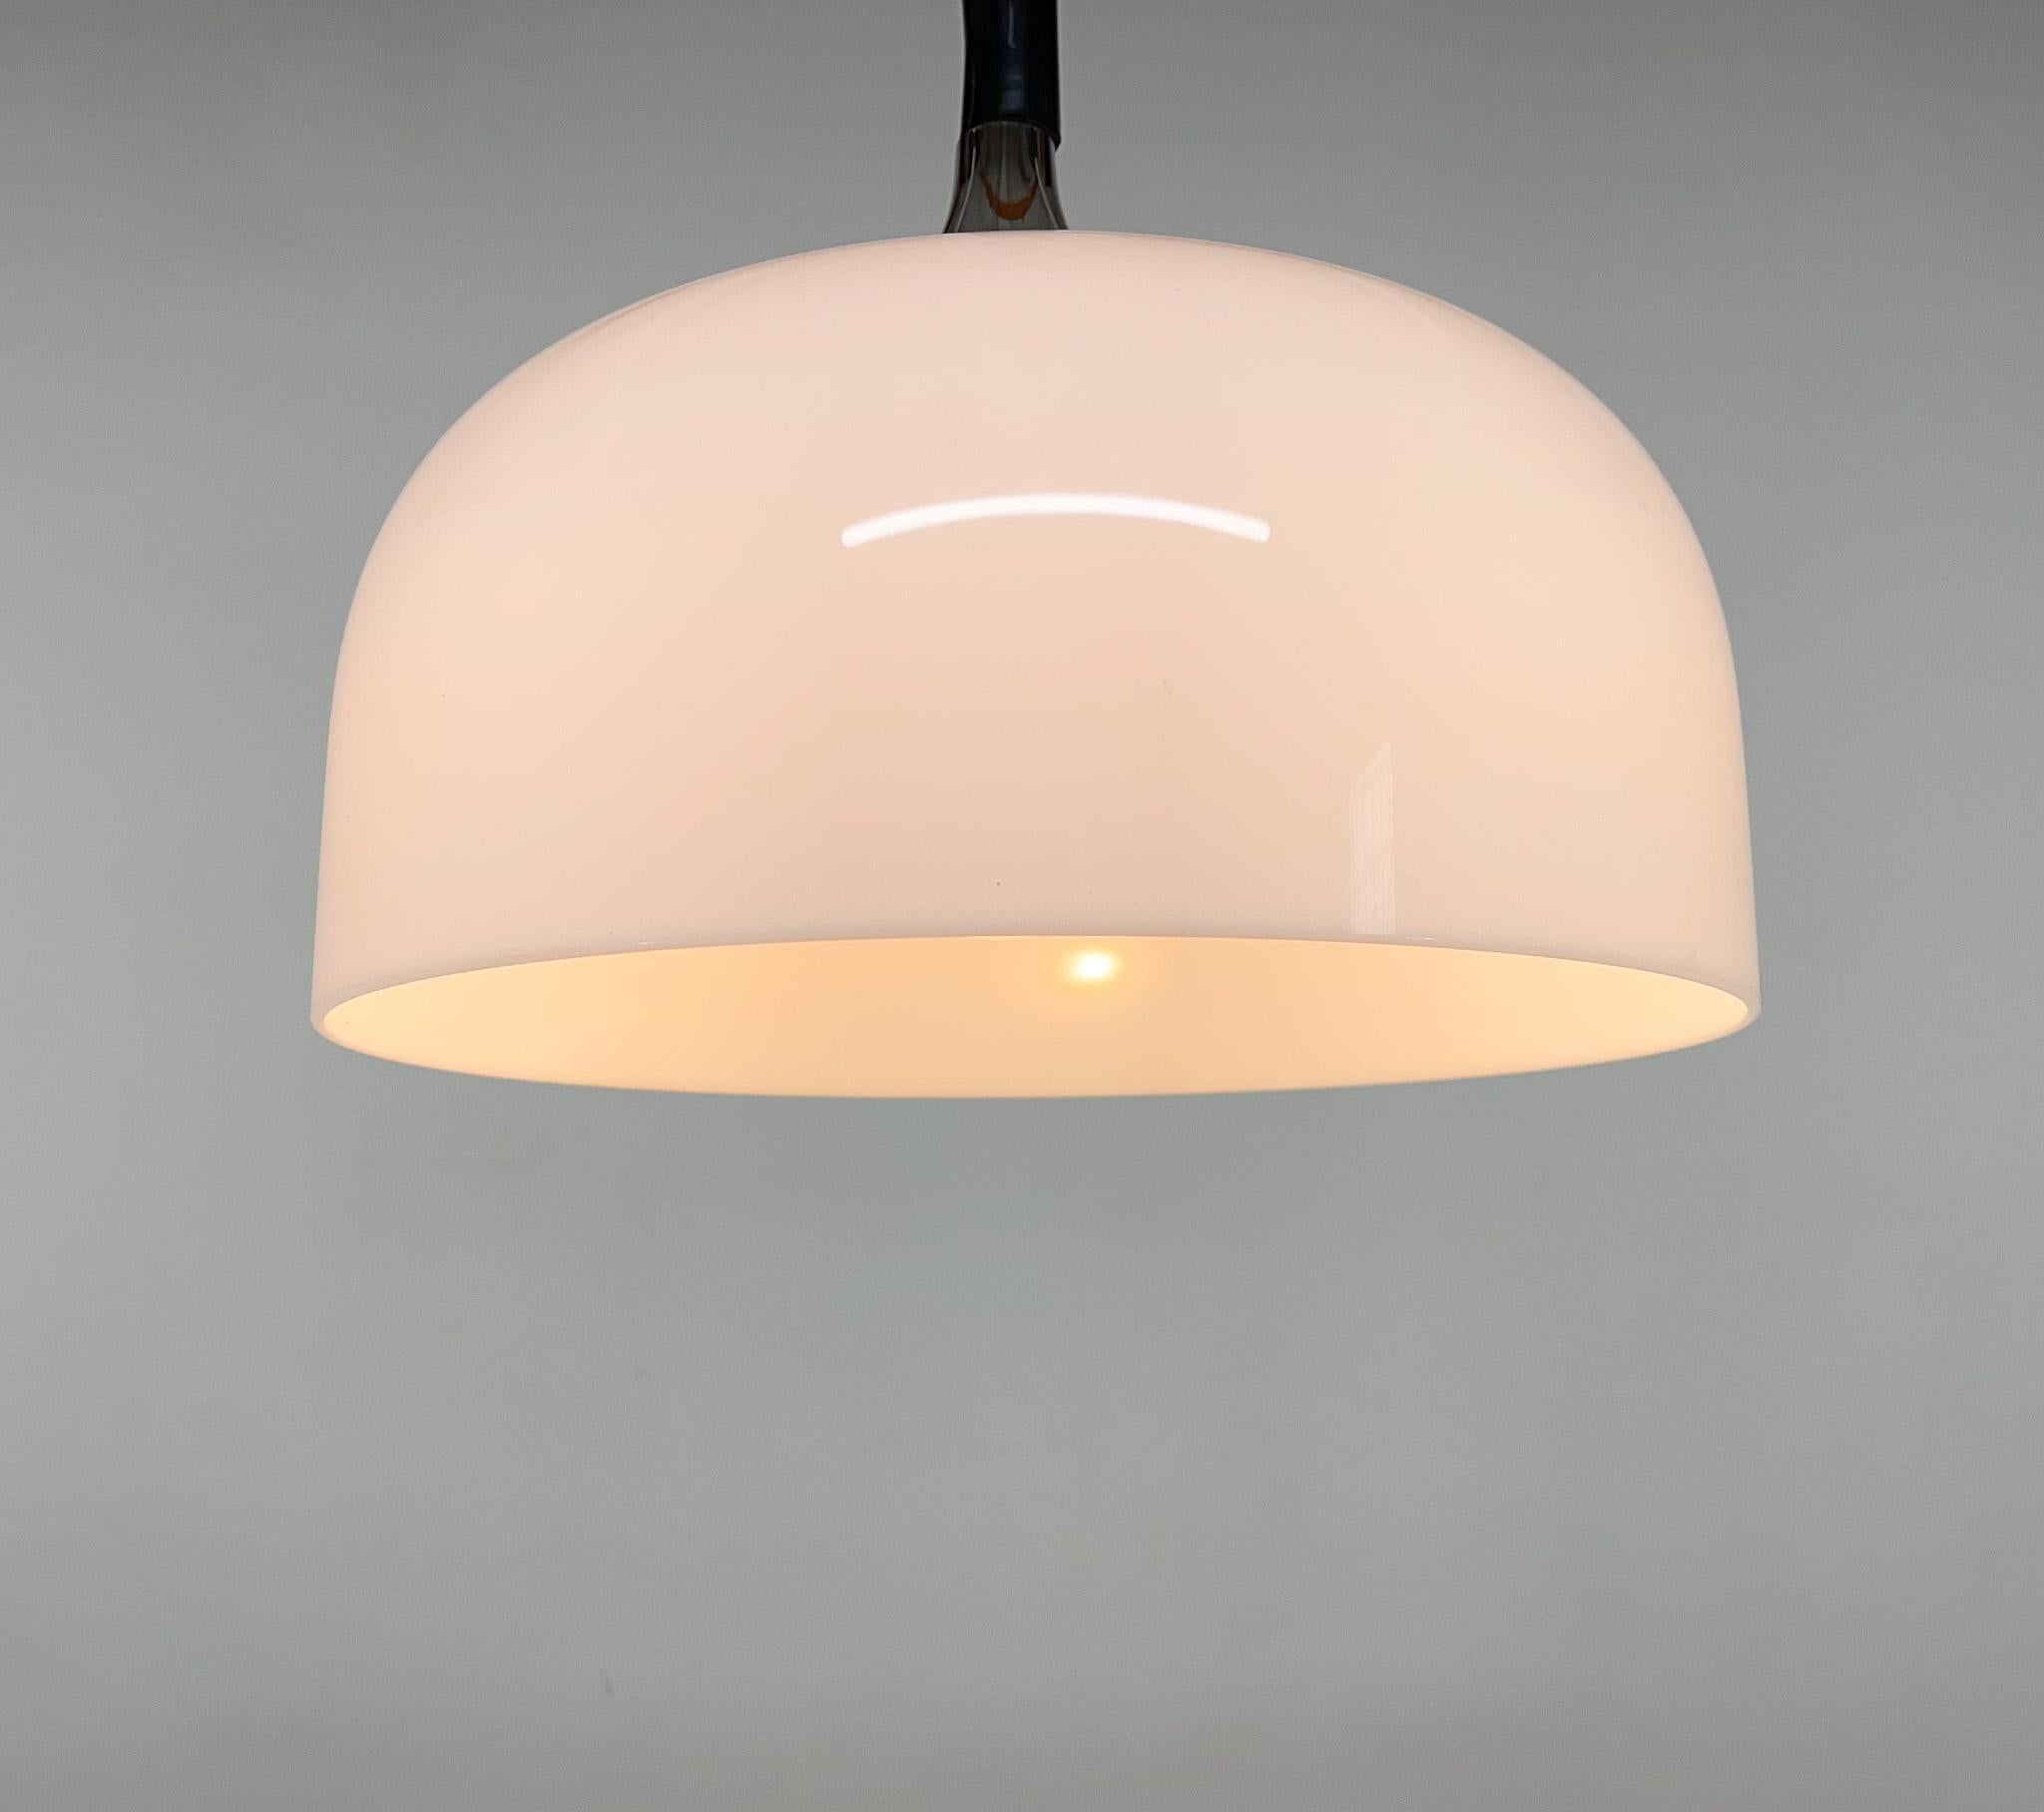 Midcentury White Pendant by Harvey Guzzini for Meblo, Italy For Sale 3